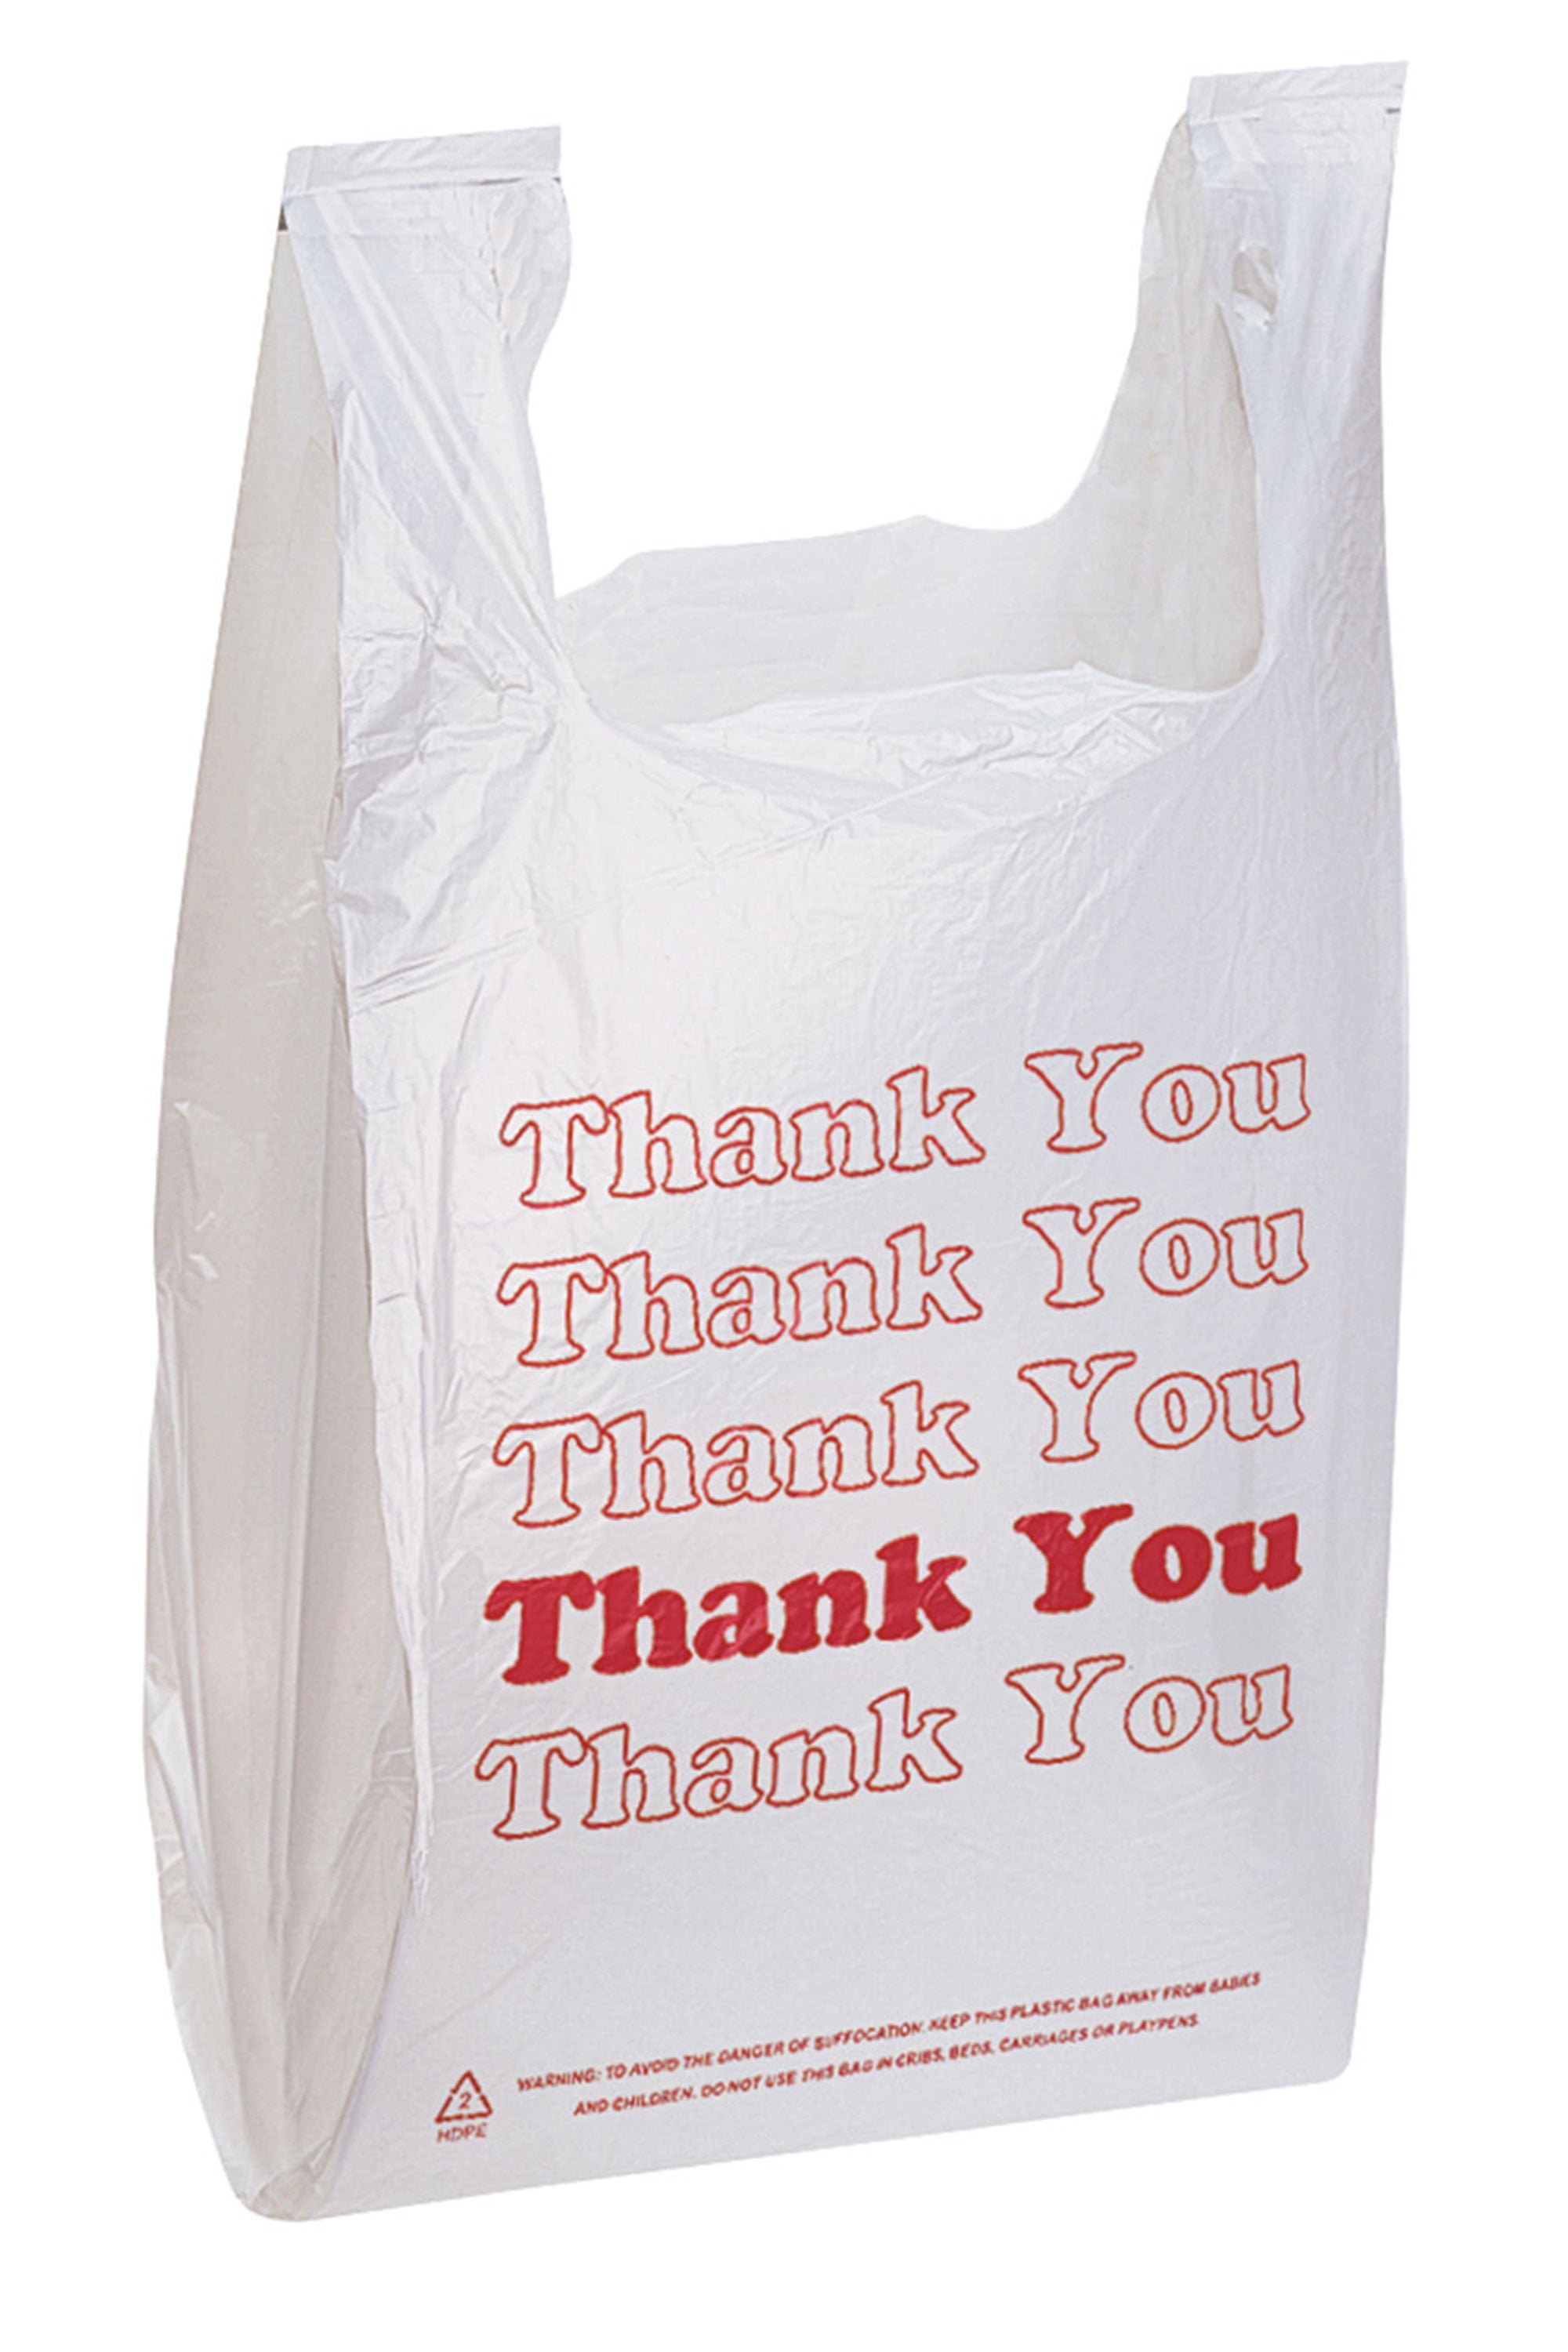 100 Black Plastic POLYTHENE Vest Style Carrier Bags Size 11 x 17 x 21 Shopping Grocery Gift Boutique Supermarket Cash N Carry Market STALL POLYBAGS